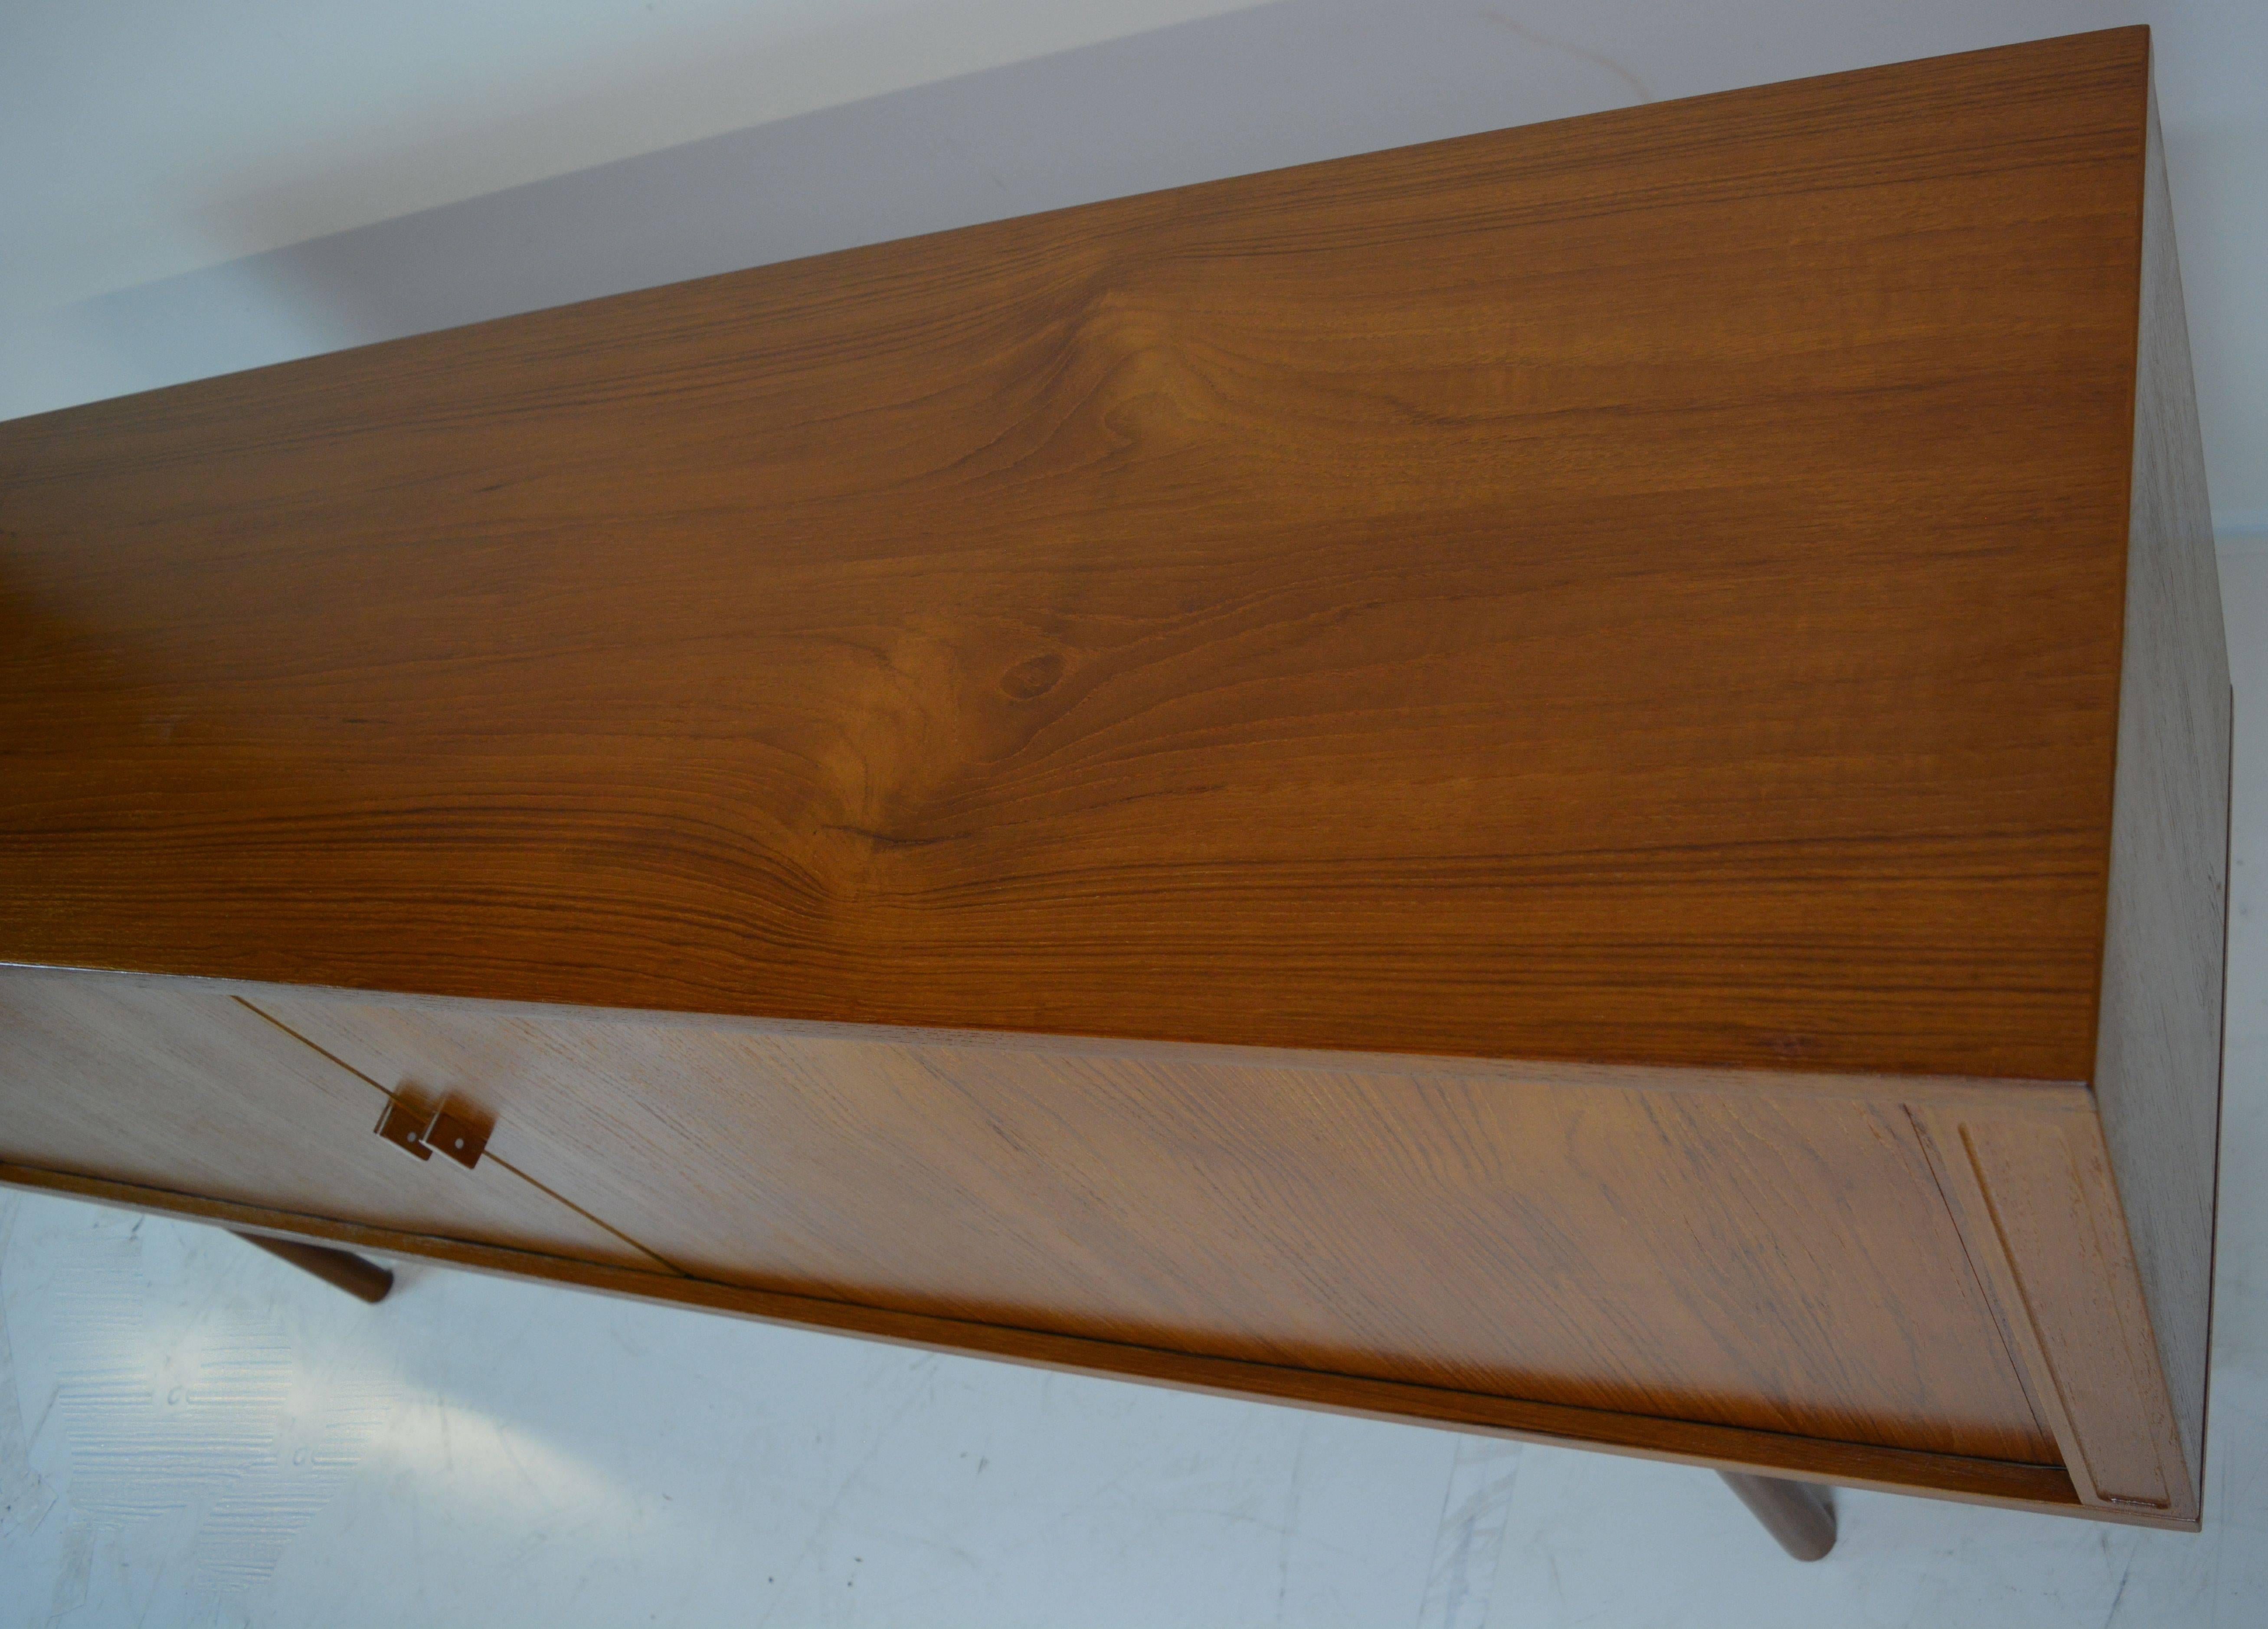 Tambour Credenza in Teak by Jens Harald Quistgaard for Lovig In Excellent Condition For Sale In San Diego, CA